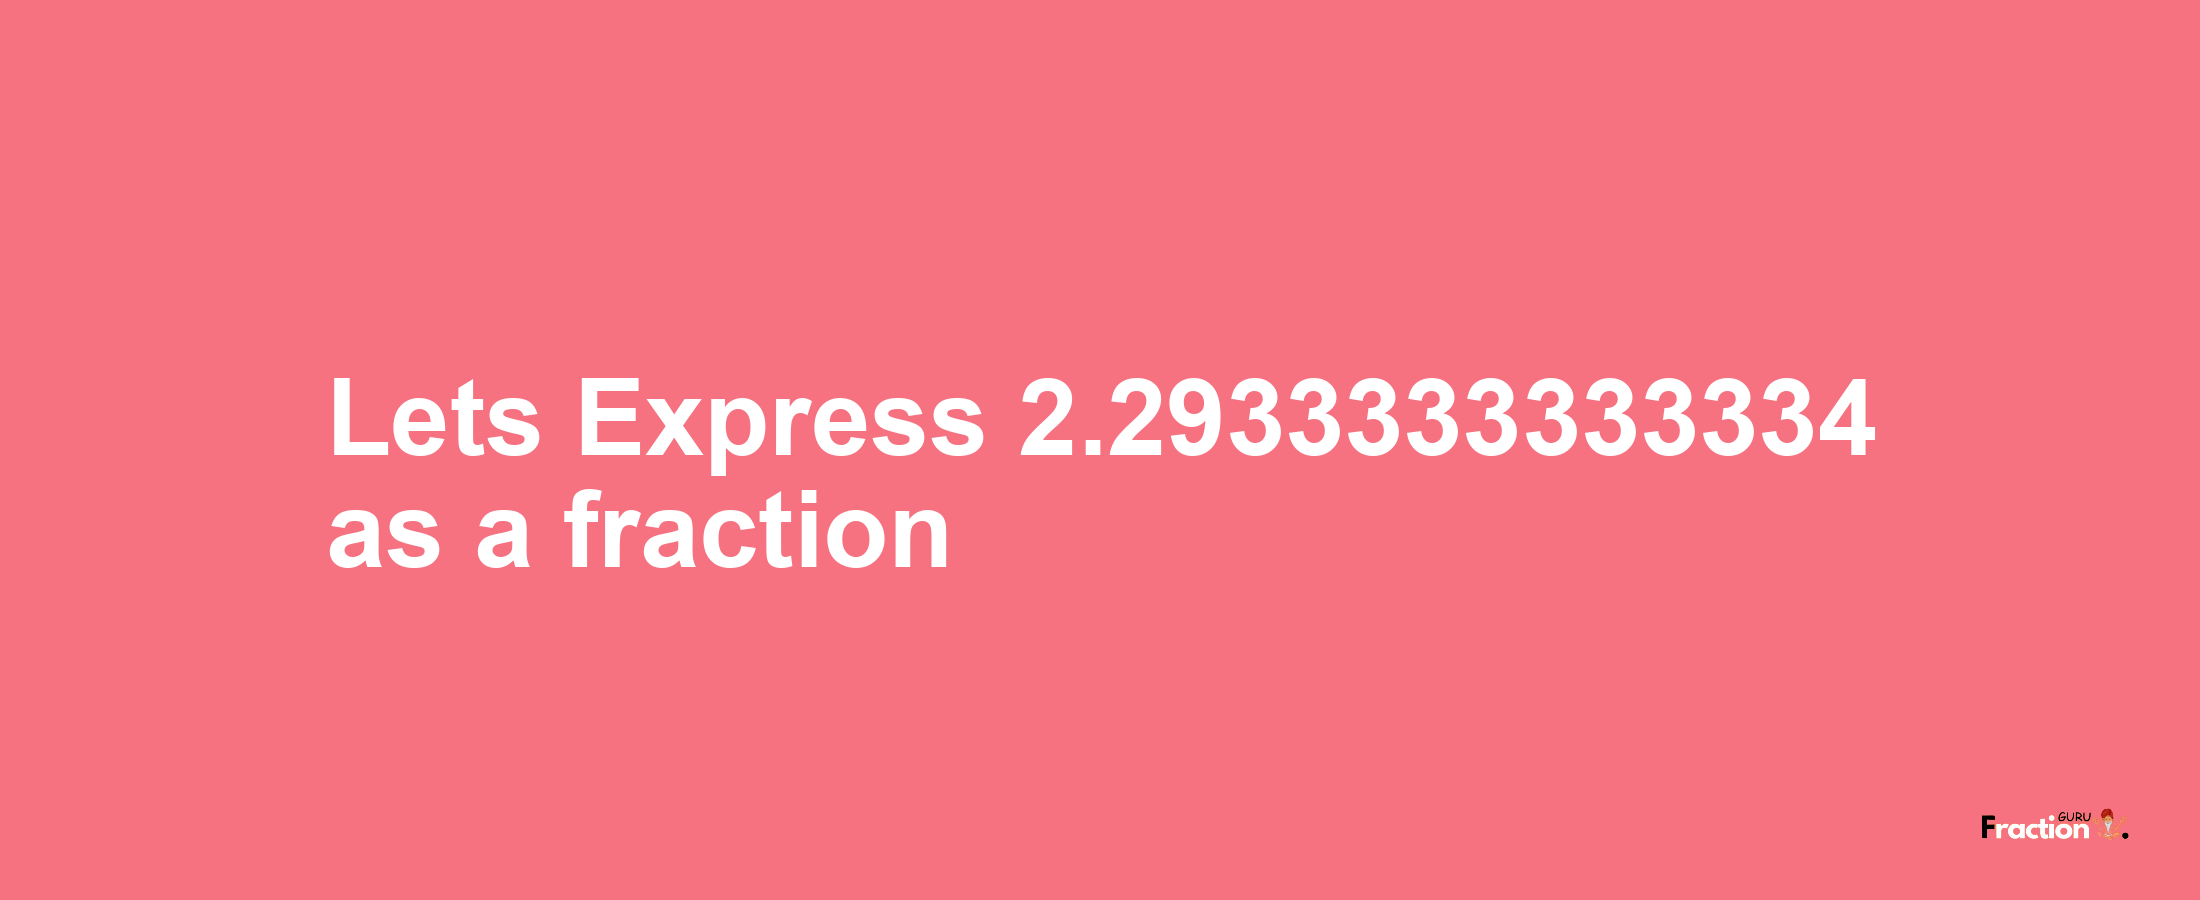 Lets Express 2.2933333333334 as afraction